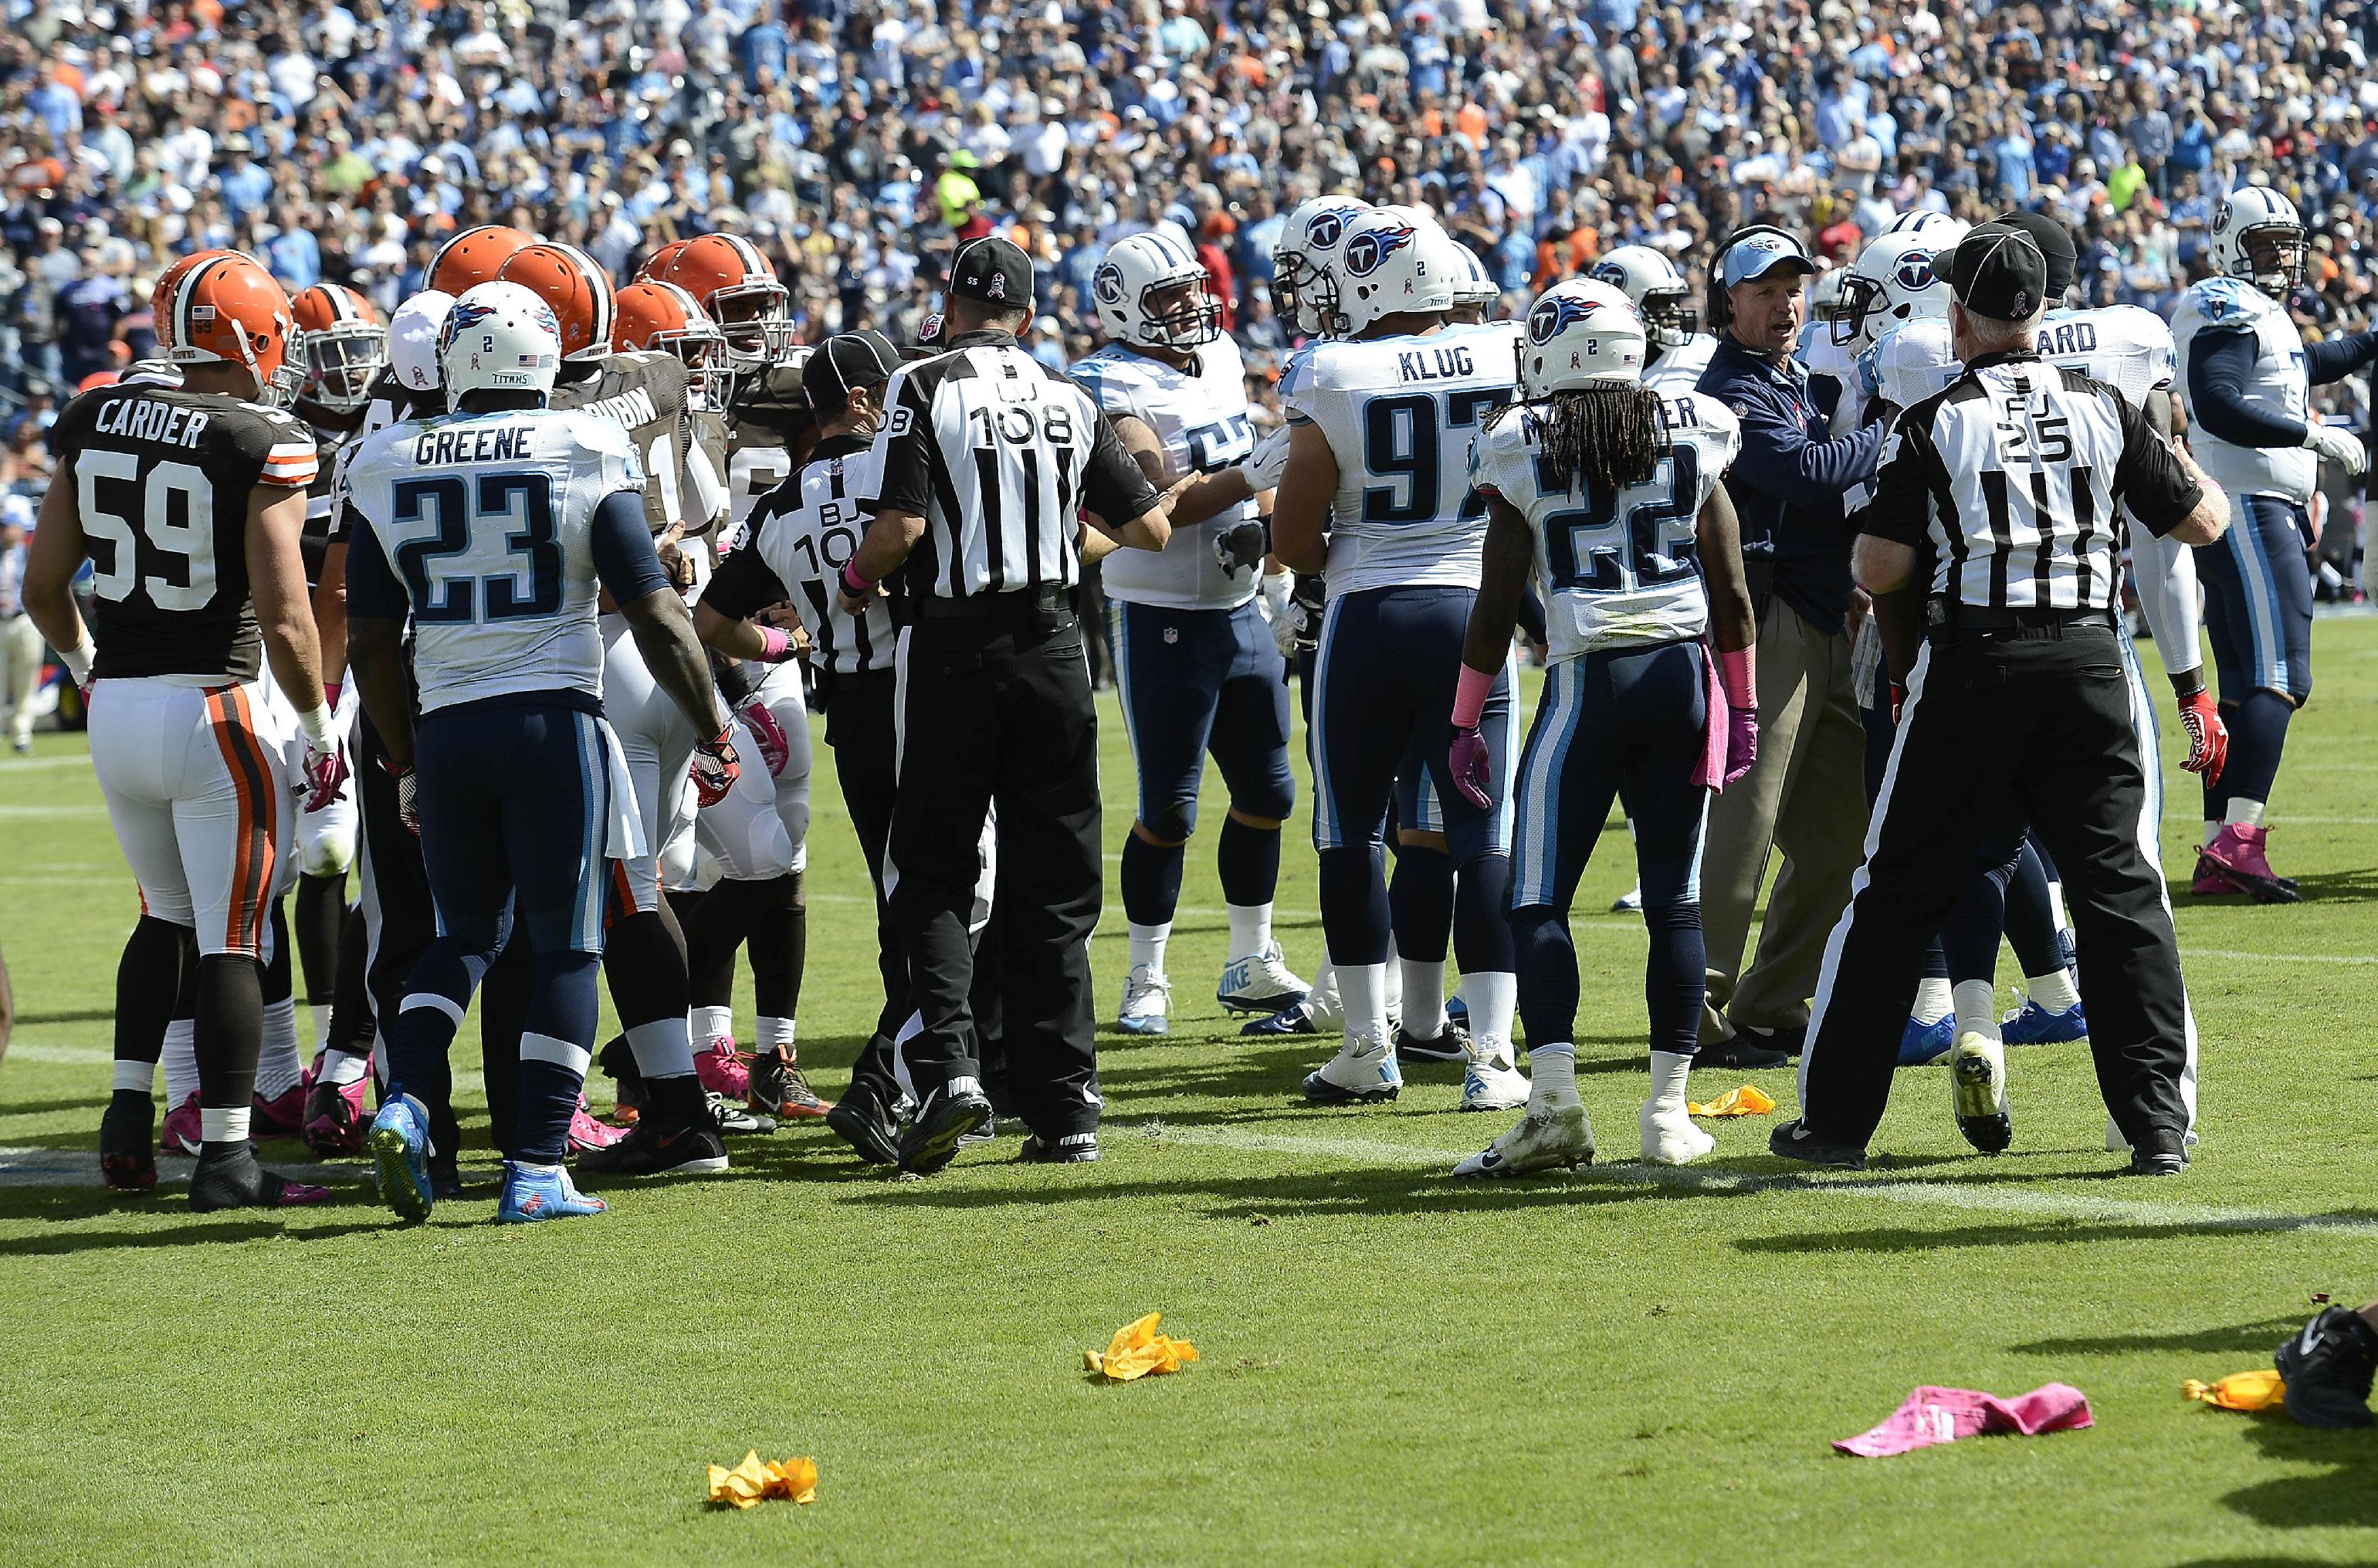 NFL penalties up more than 2 per game this season